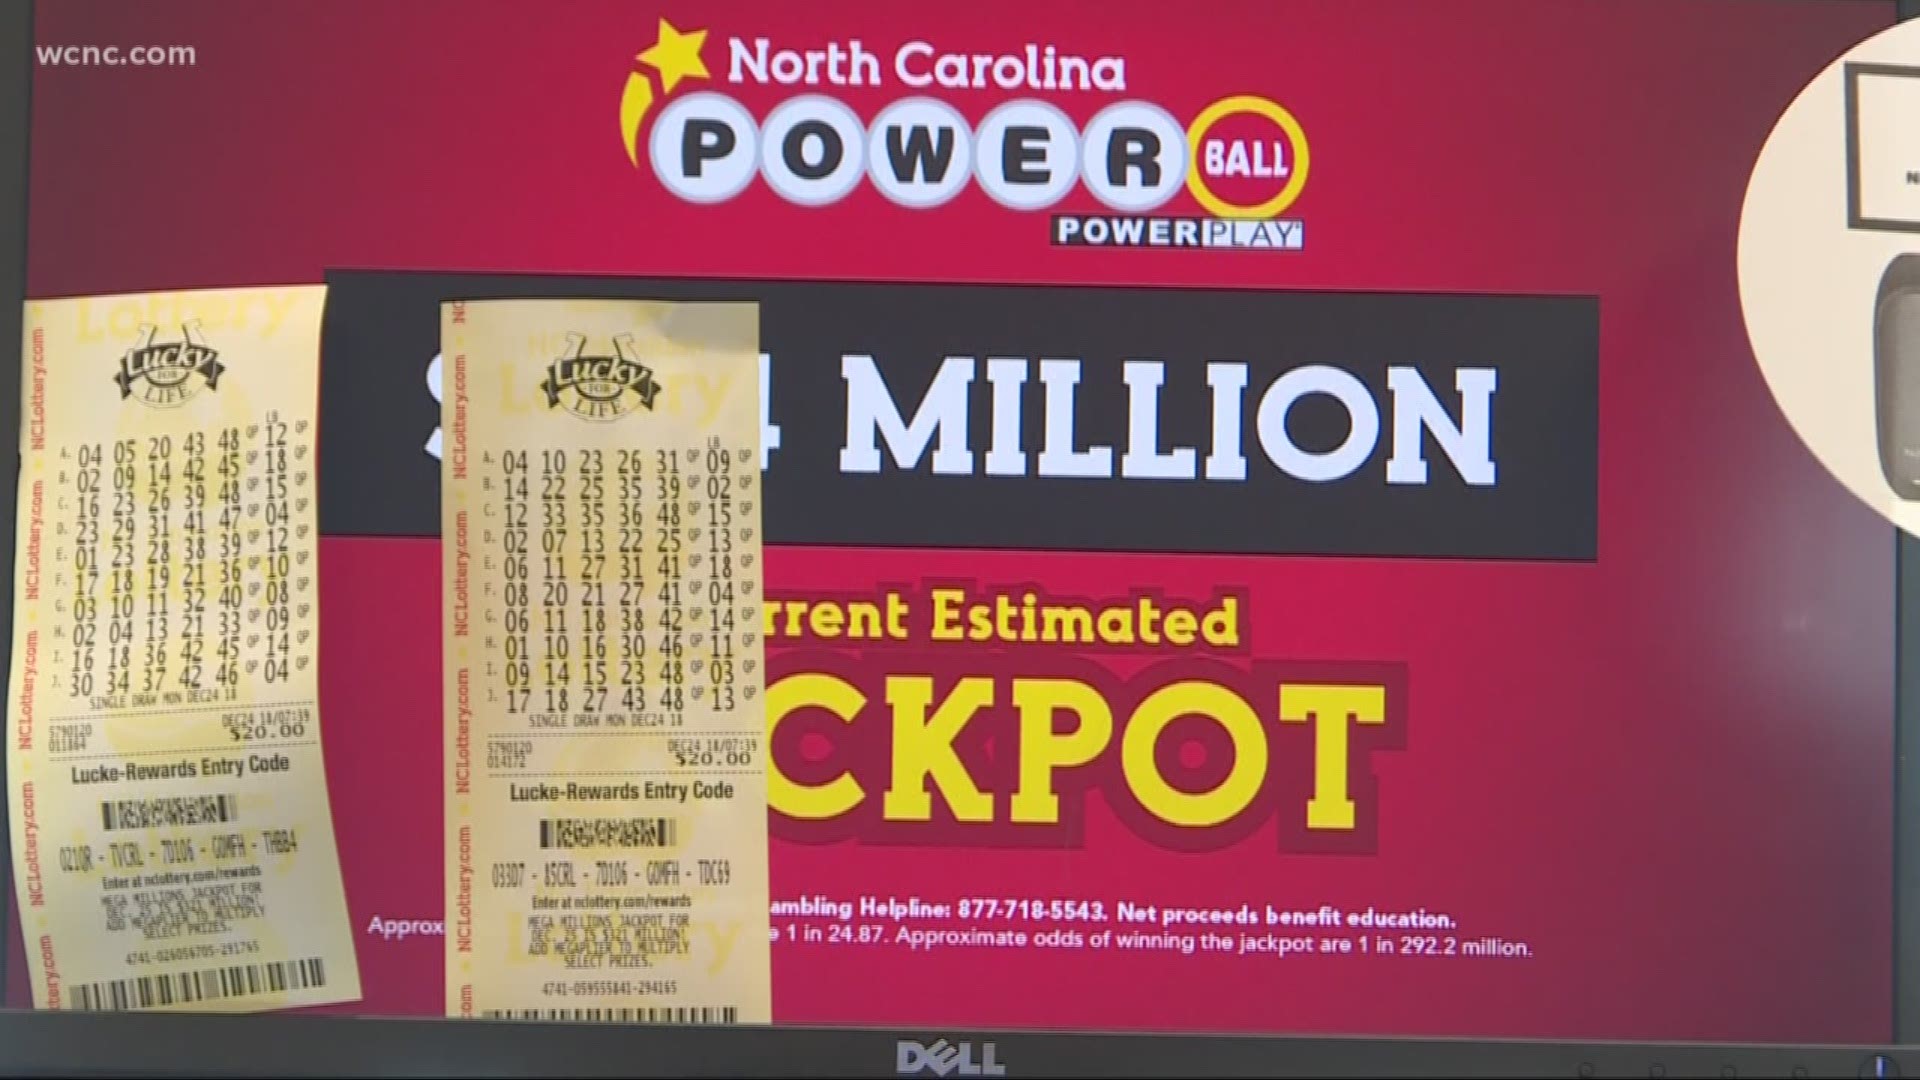 The next Mega Millions drawing will take place on December 25, with a jackpot estimated at $321 million.